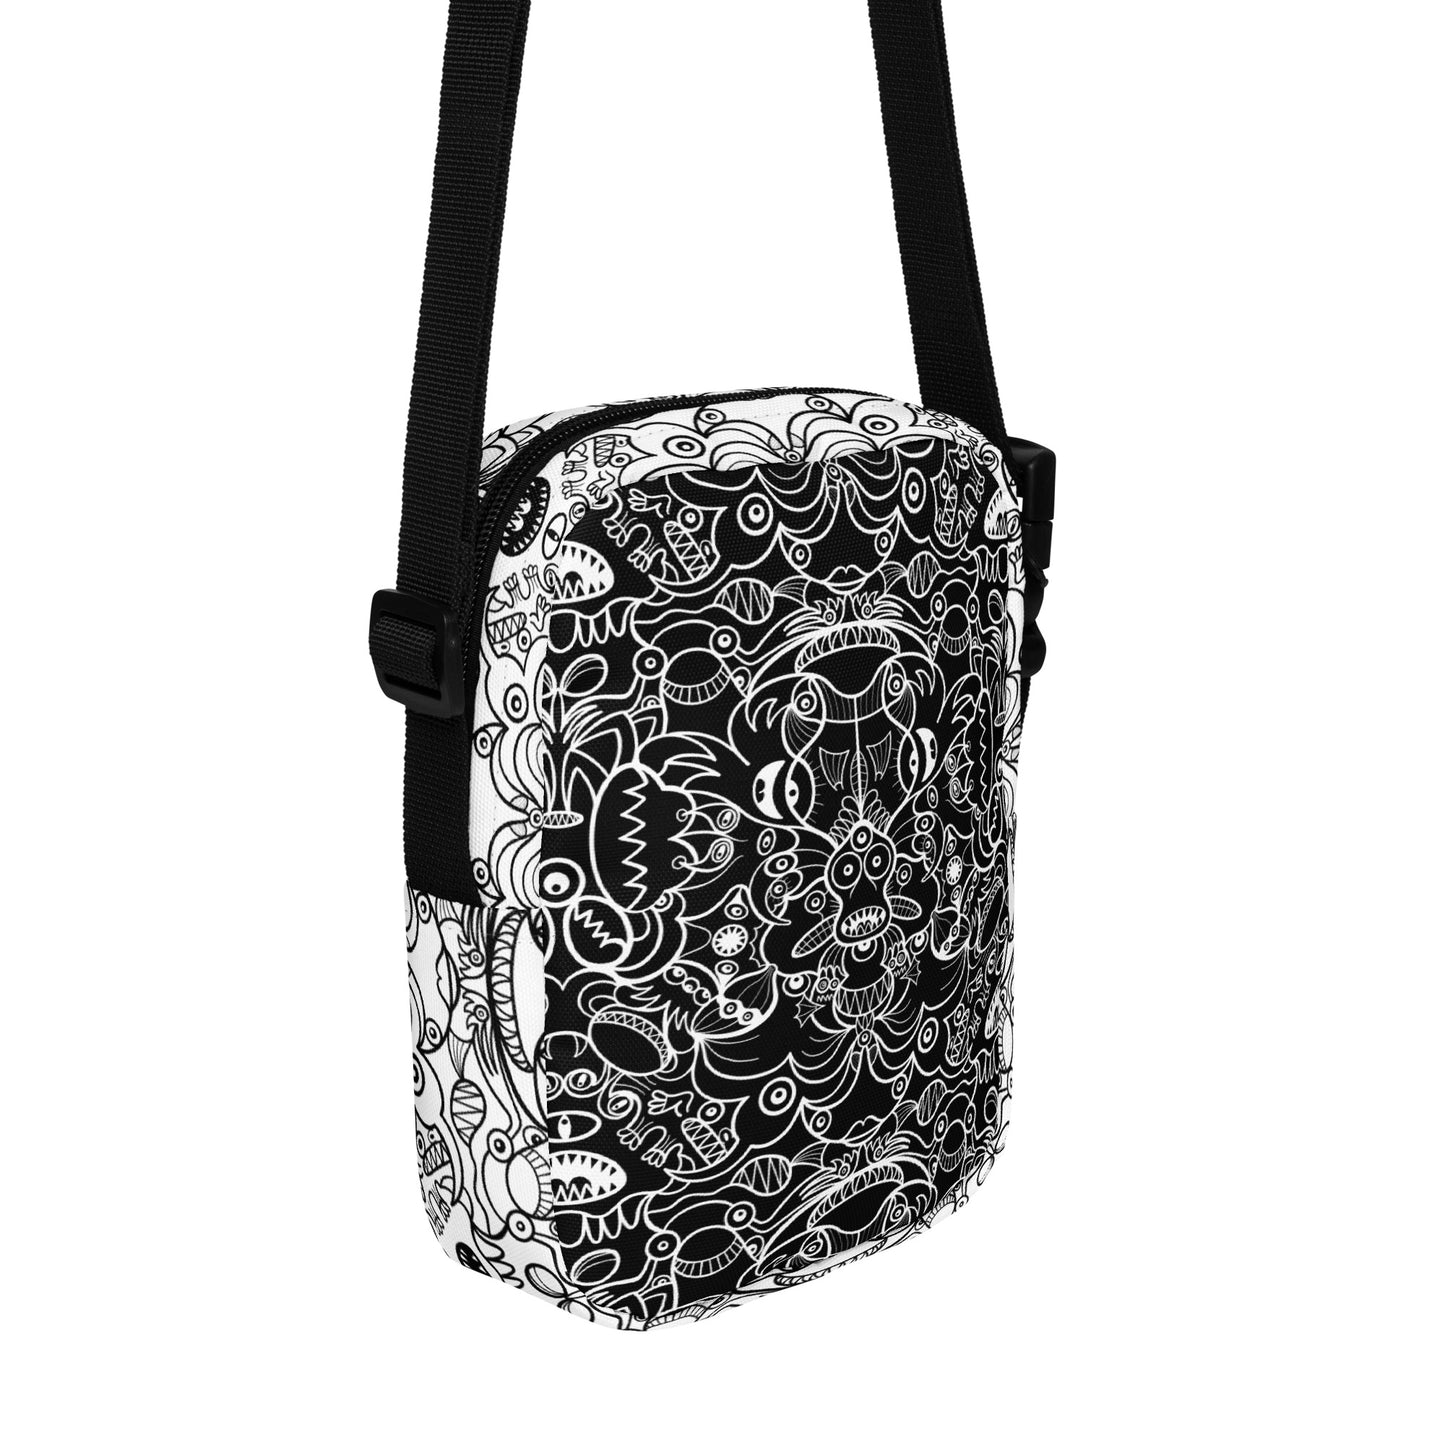 The powerful dark side of the Doodle world - Utility crossbody bag. Back view